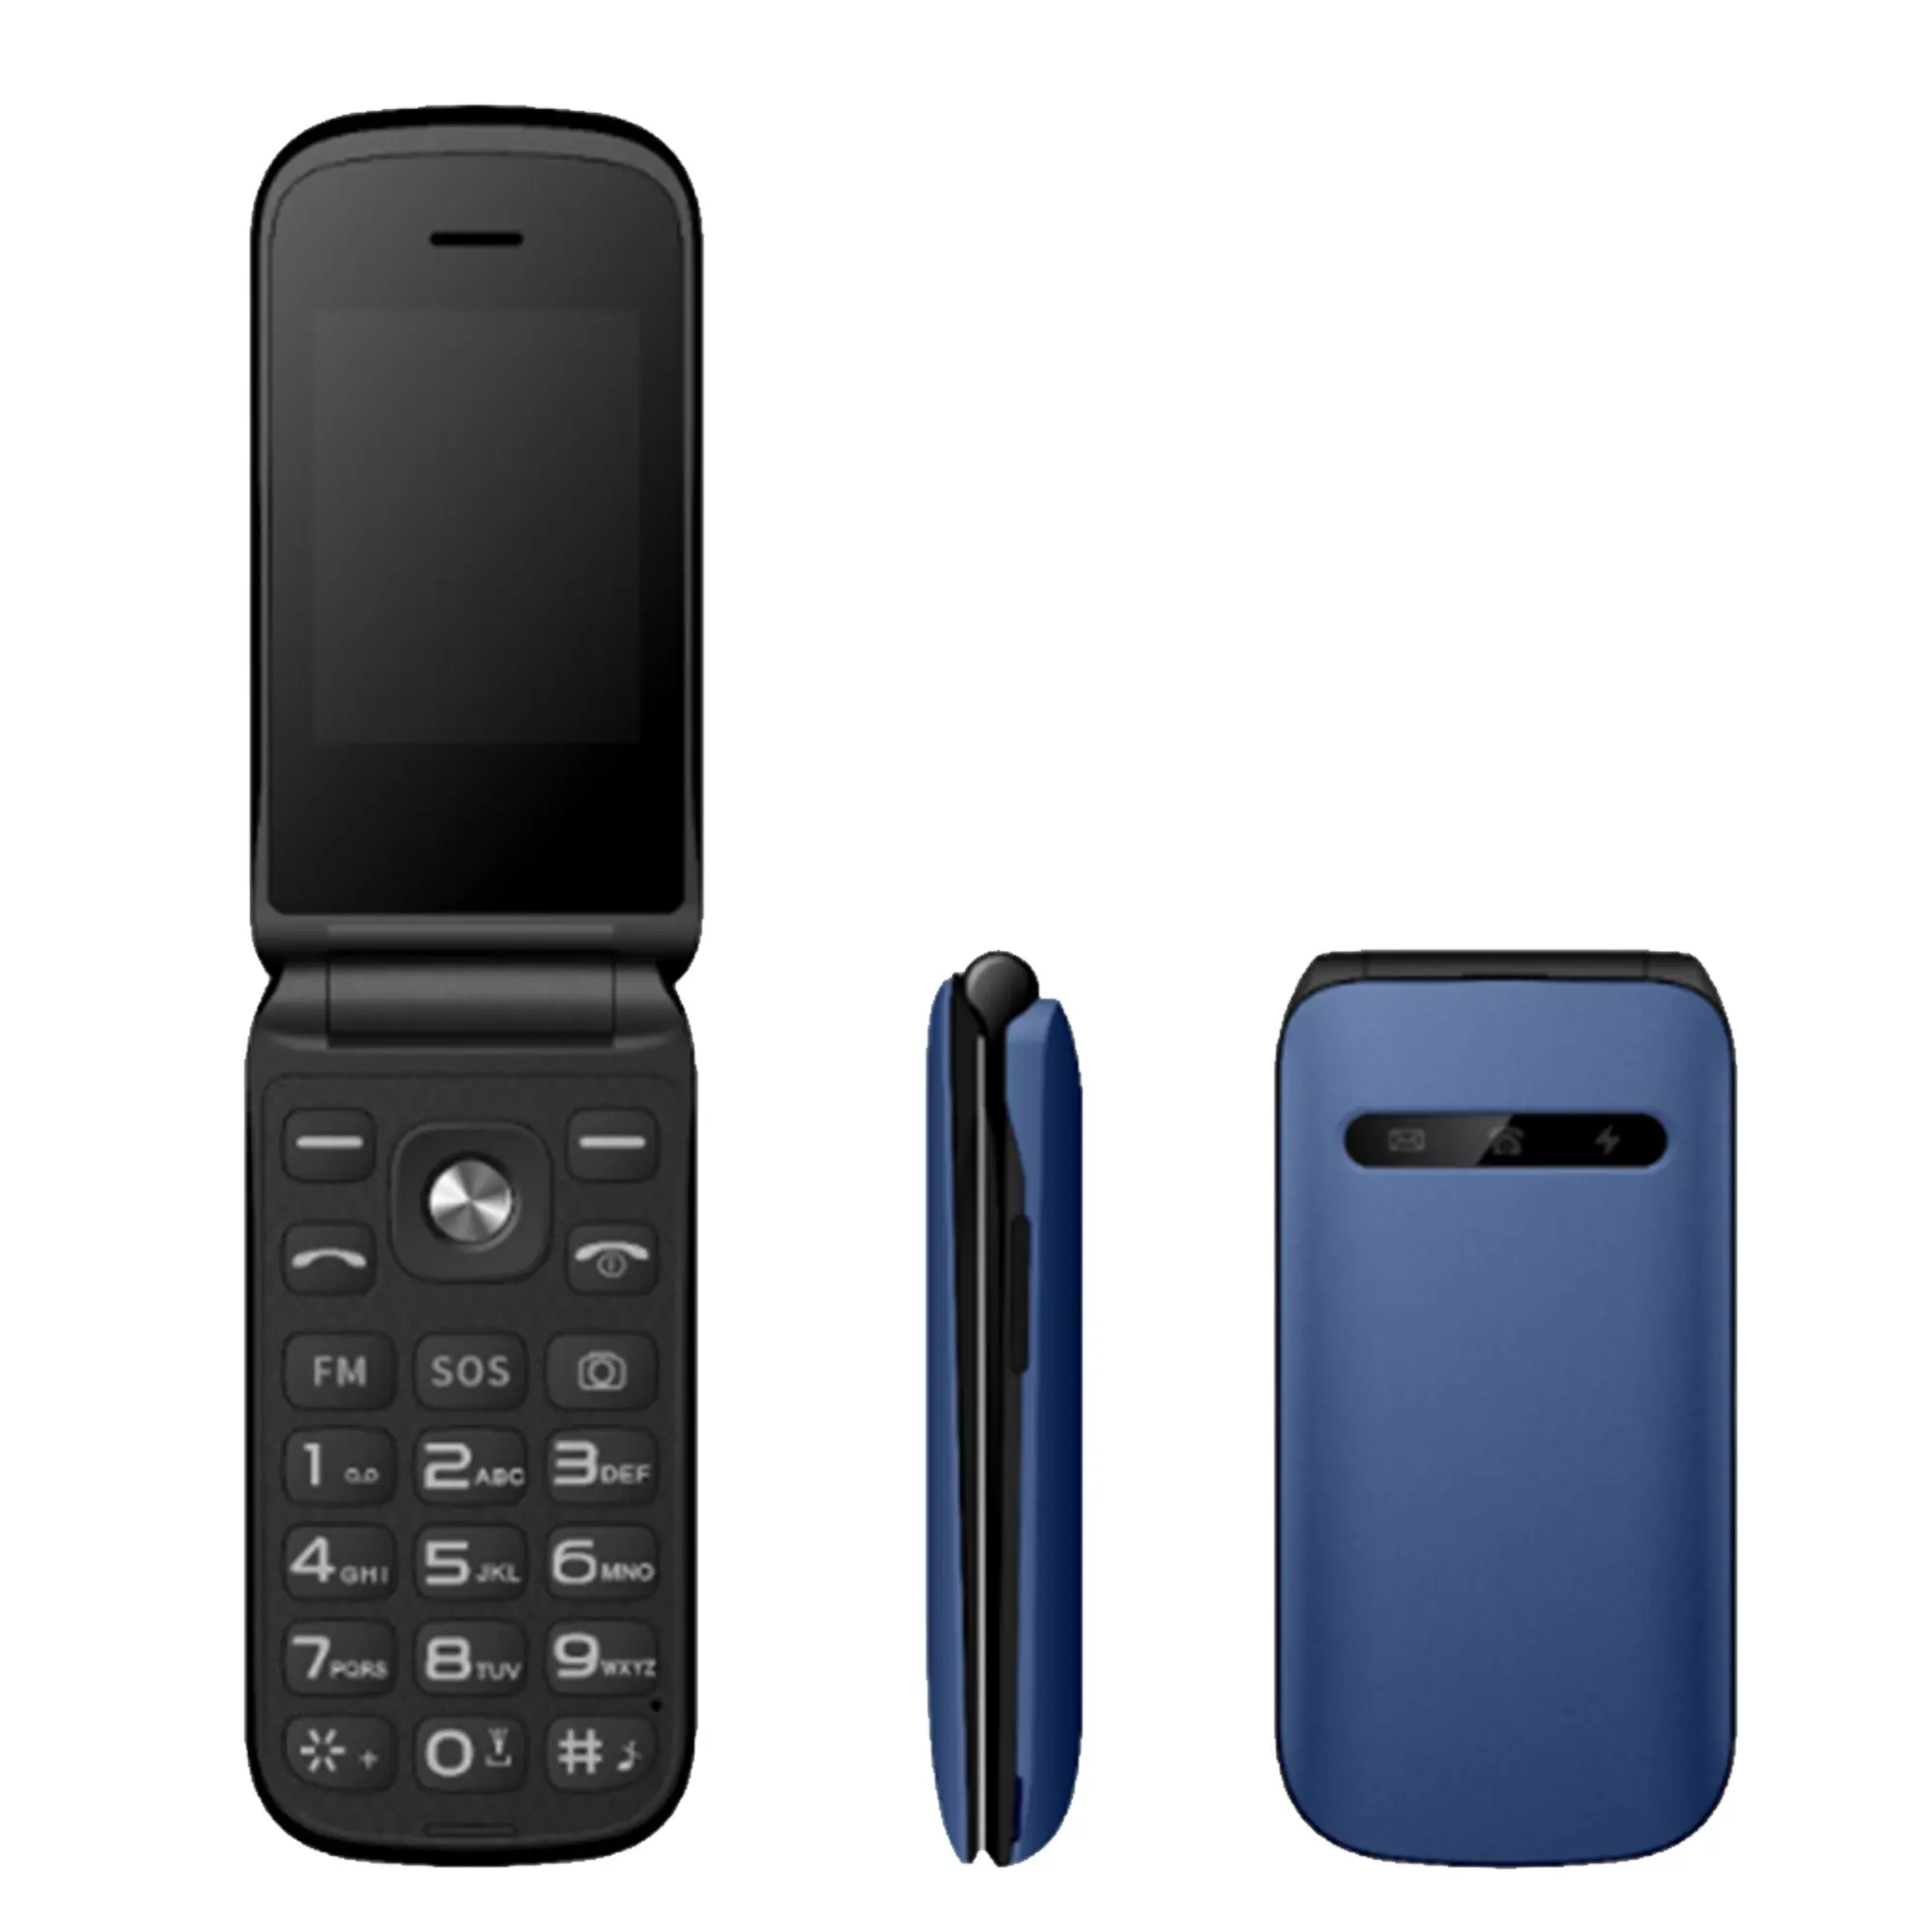 Android system 4G flip feature phone active dual sim mobile phone with dual screen 4g senior cell phone